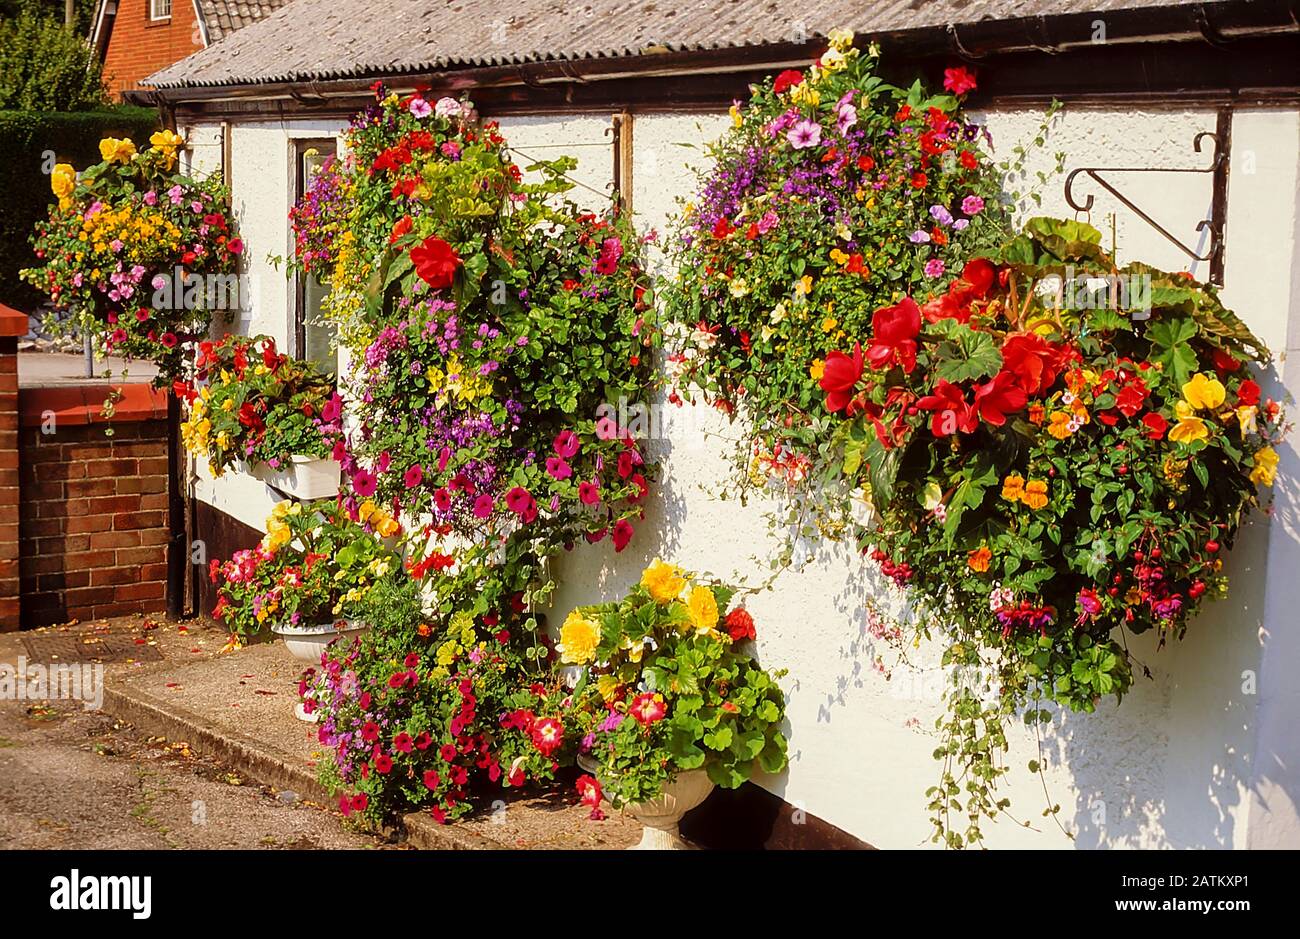 Collection of large hanging baskets of mixed flowers on side of white walled cottage with flowers in tubs beneath them. Stock Photo